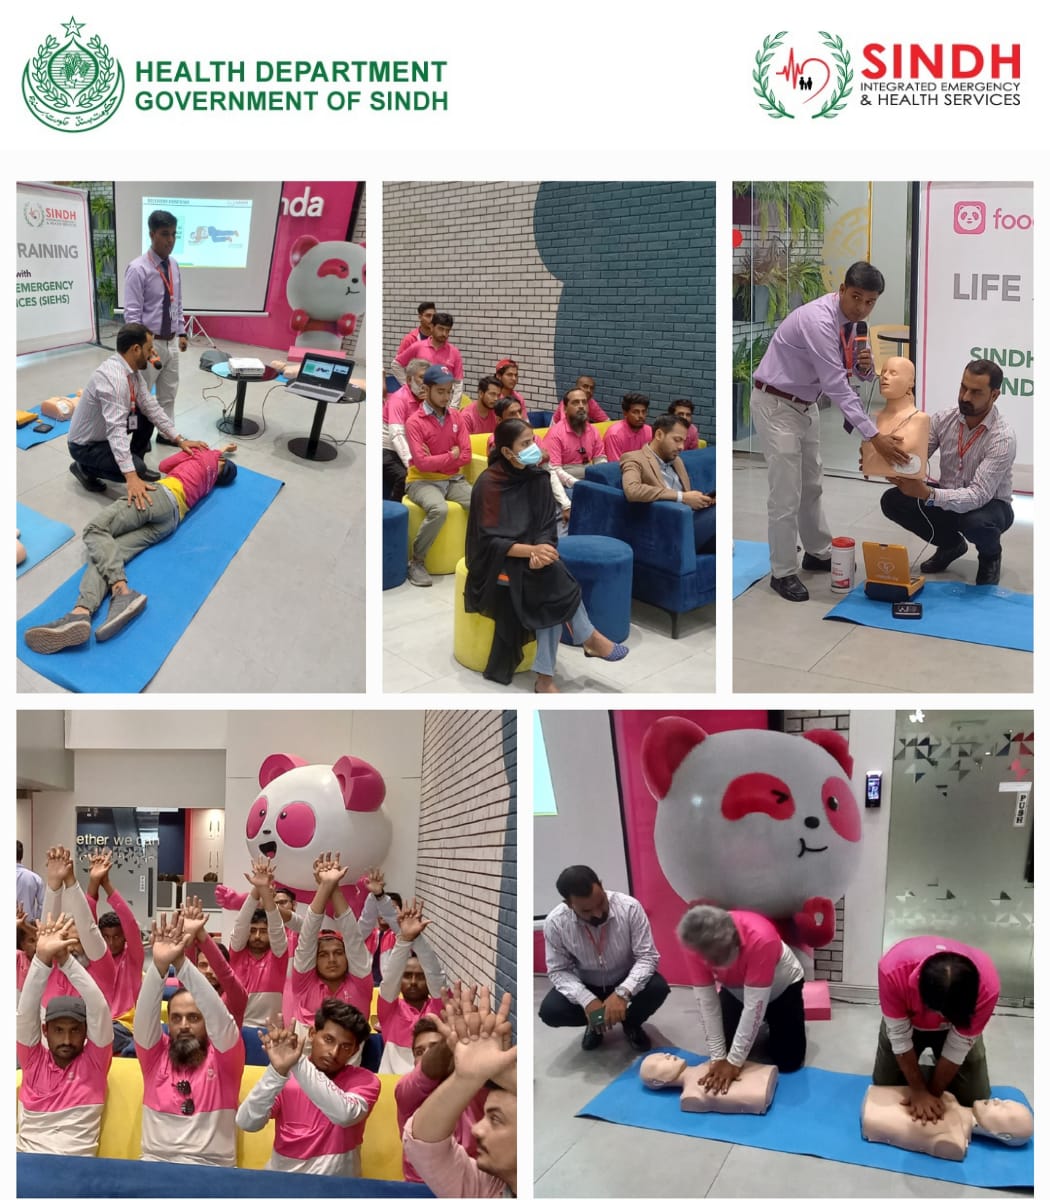 #SIEHS #1122 trained 25 of @foodpanda_pk riders with CPR and the use of an AED machine. The training was conducted by the Clinical Training Department, SIEHS to equip riders with knowledge of basic first-aid, as an initiative to #savemorelives. @SindhHealthDpt @SindhGovt1